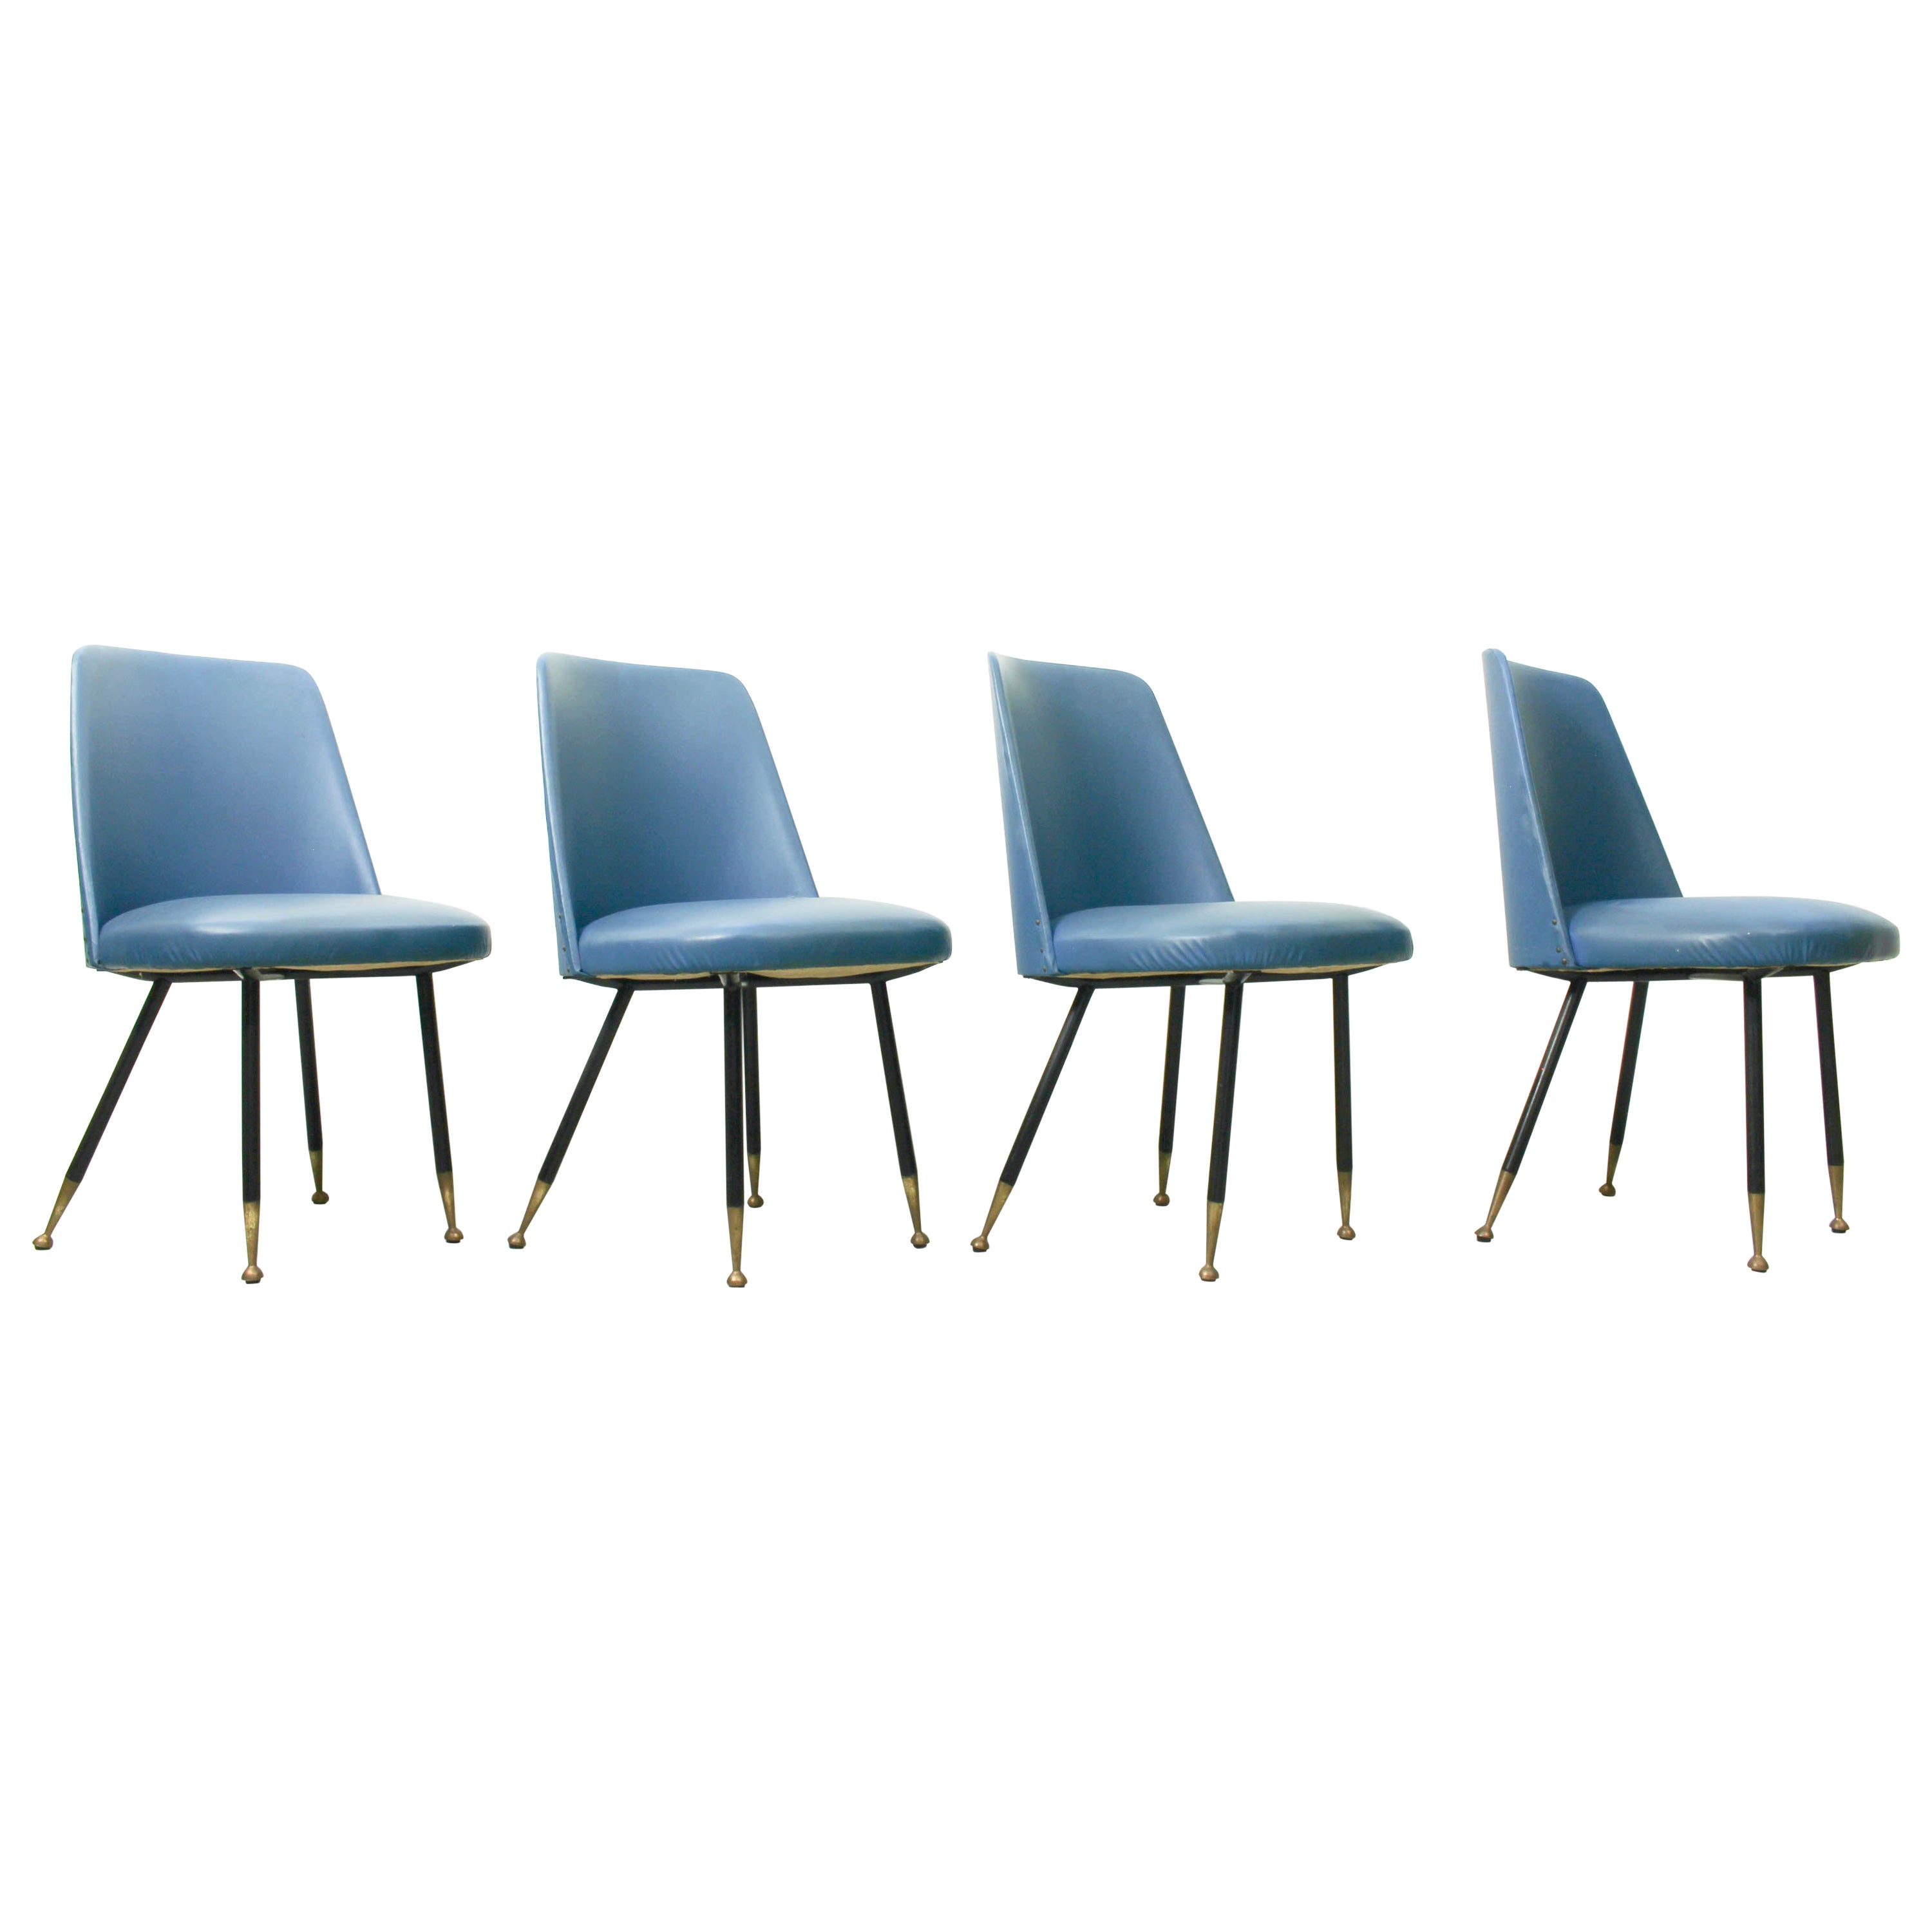 Set of 4 Elegant Italian Dining Chairs with Brass Feet, 1950s For Sale